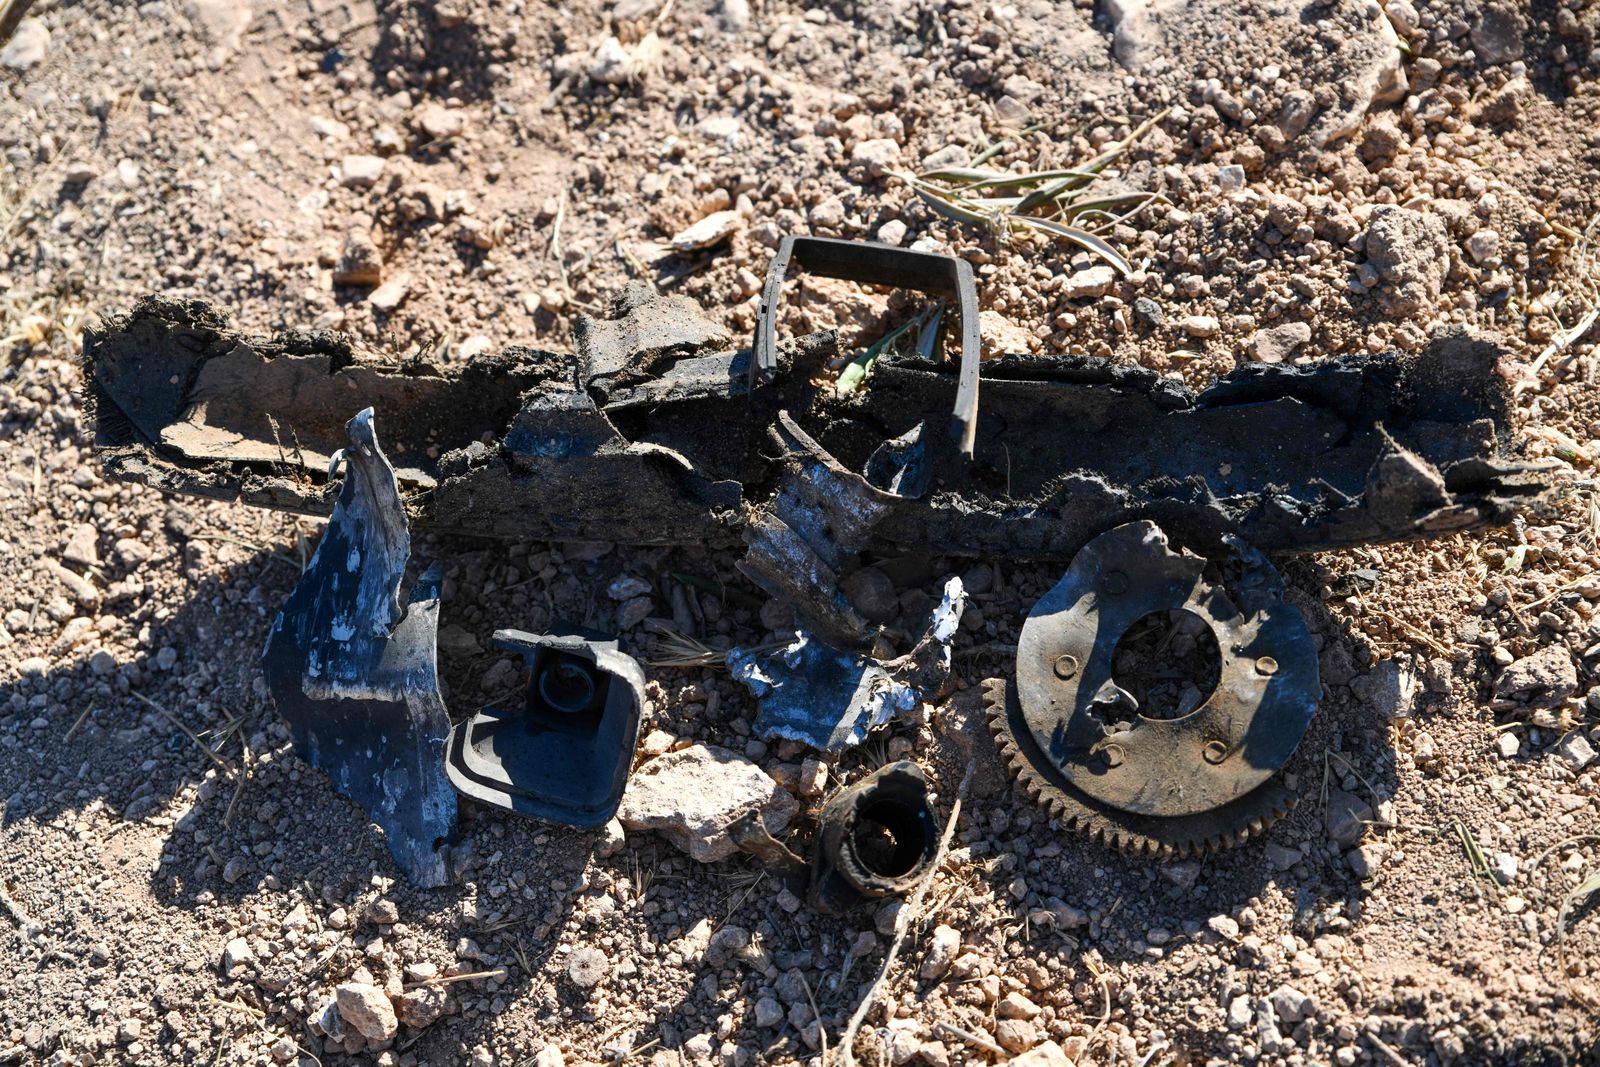 A picture shows debris at the site where a US drone targeted Maher al-Agal, a leader in the Islamic State militant group, near the village of Khaltan, near Jindires in northern Syria, on July 12, 2022. - A man US officials called the leader of the Islamic State militant group in Syria was killed Tuesday in a drone strike, the Pentagon said. Maher al-Agal was killed while riding a motorcycle near Jindires in northern Syria, and one of his top aides was 